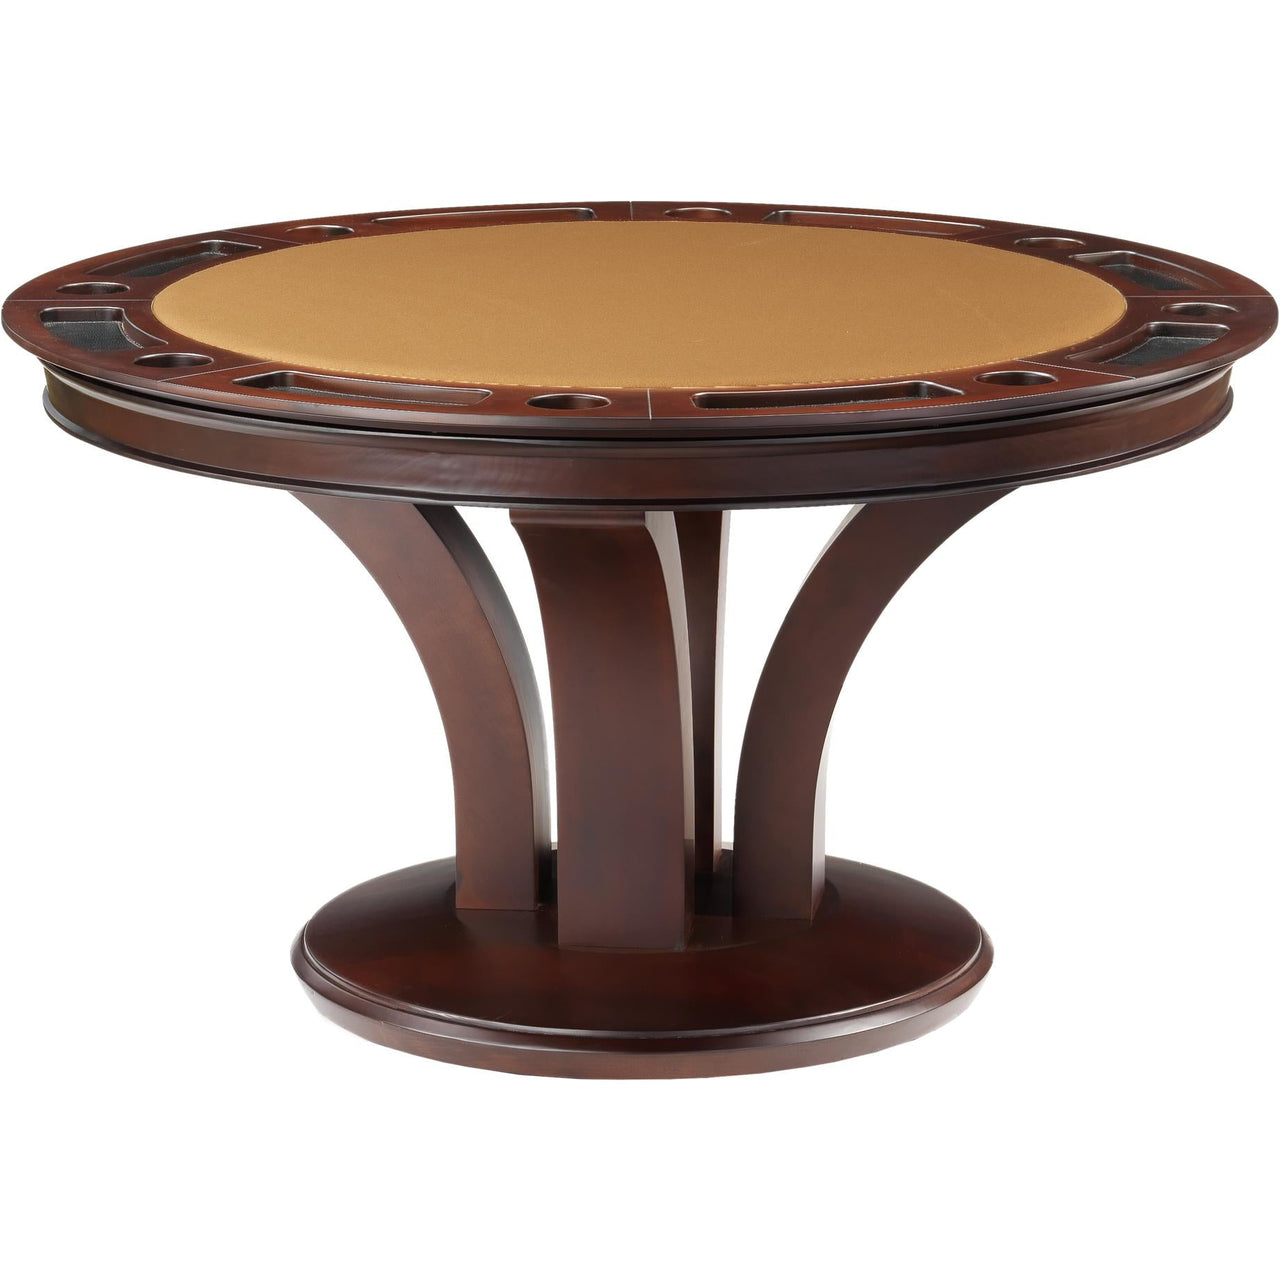 Convertible Round Poker & Dining Table Treviso by Darafeev-AMERICANA-POKER-TABLES